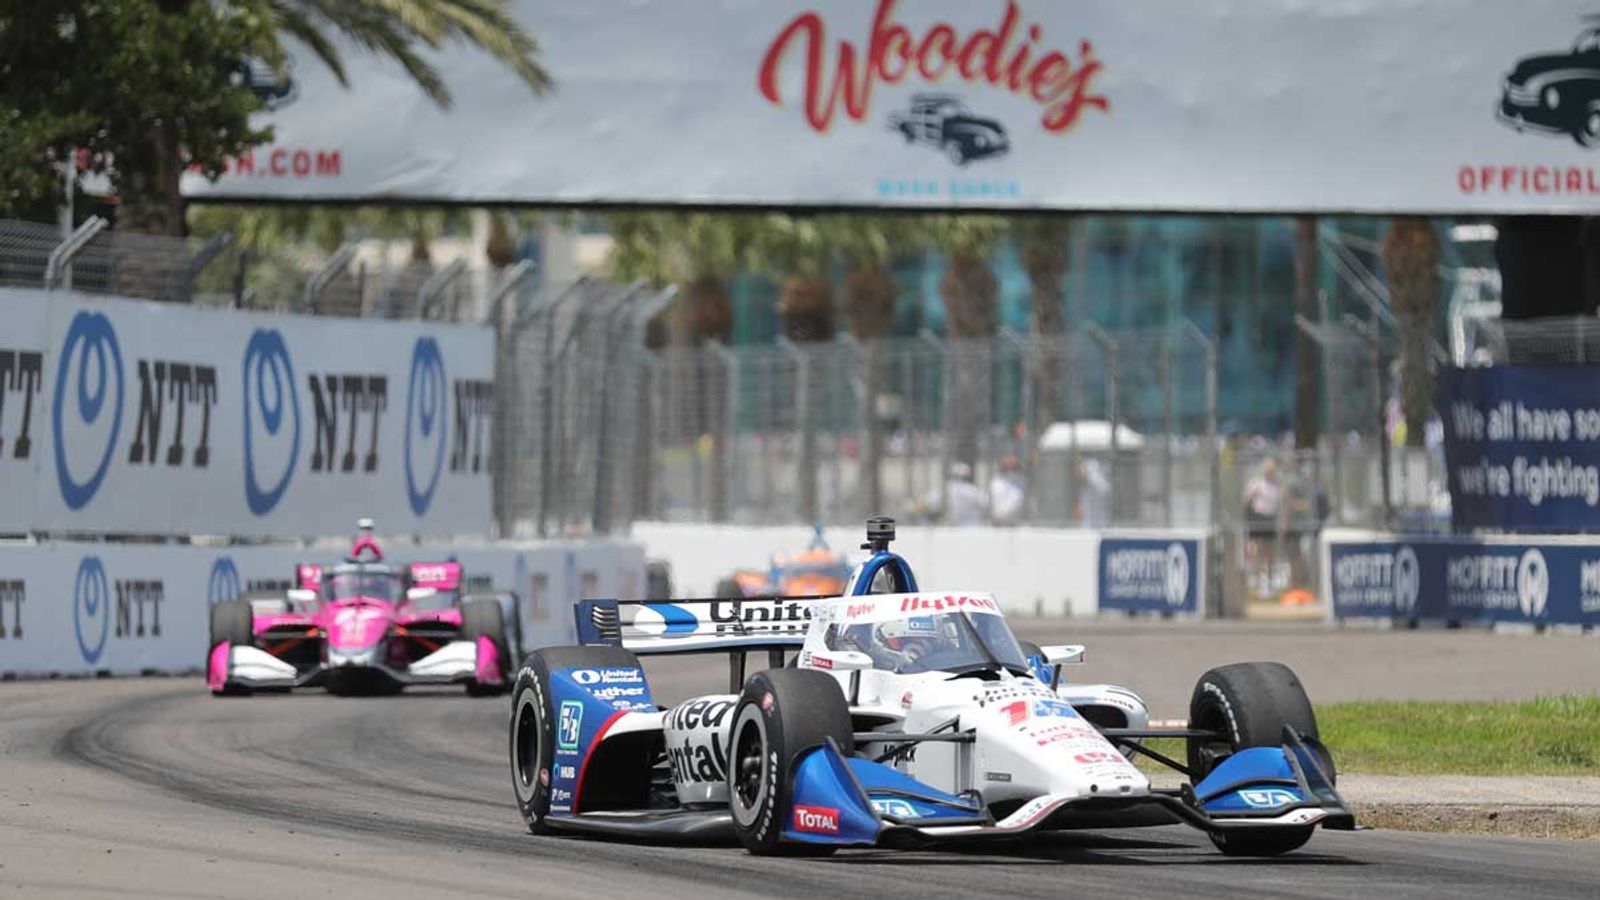 NTT IndyCar Series 2022 on Sky: Live Streaming and TV |  More sports news